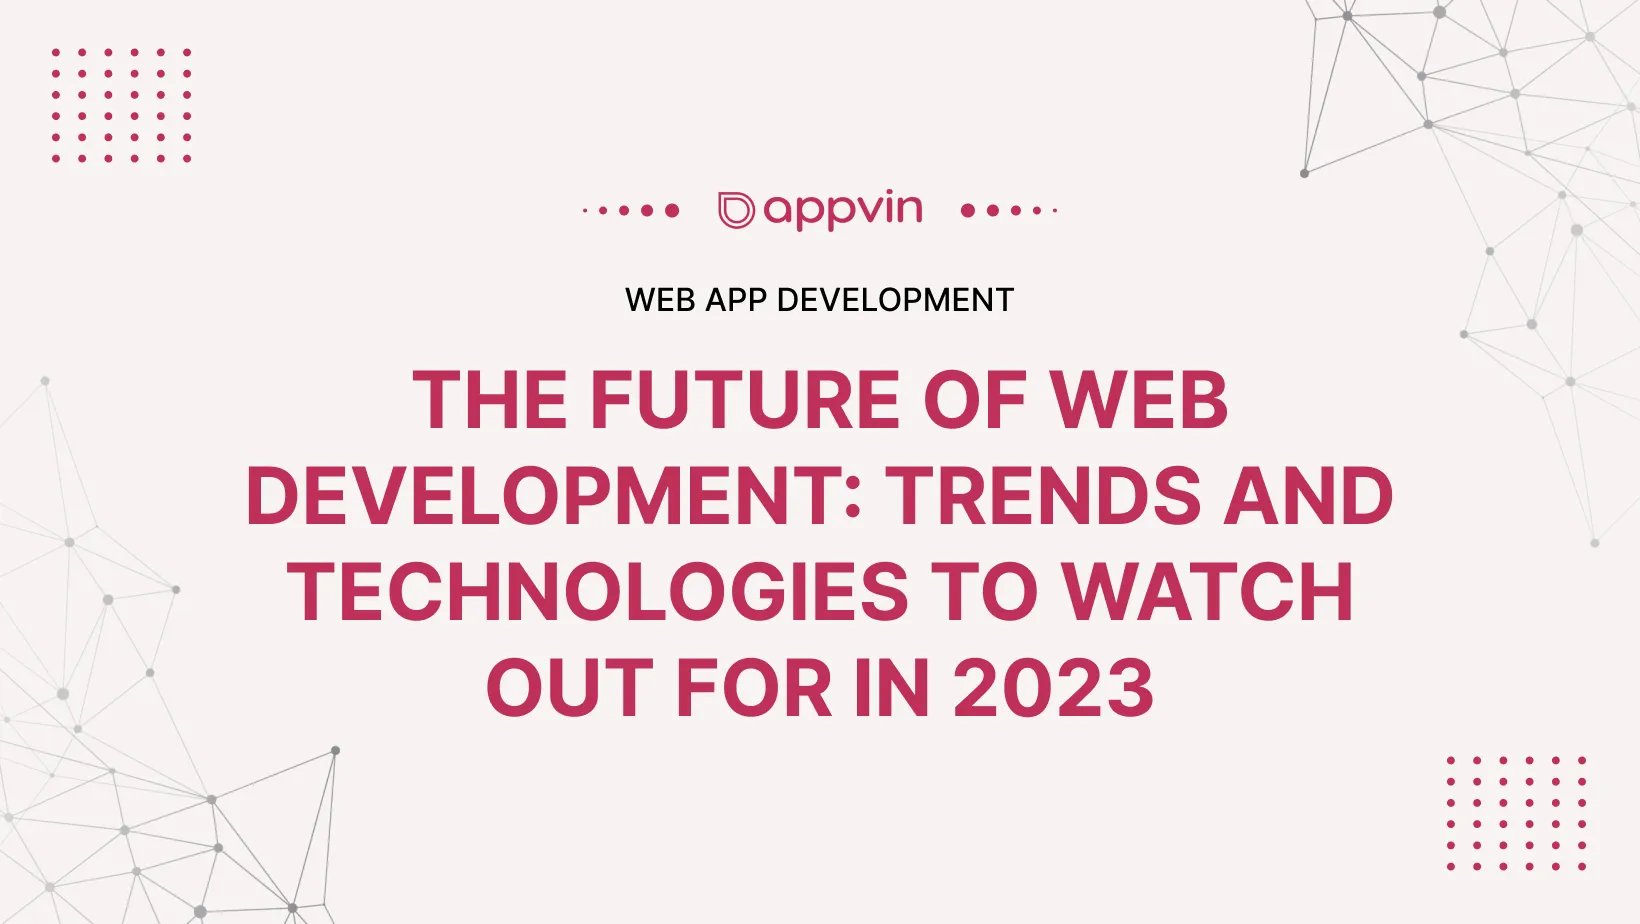 The Future of Web Development Trends and Technologies to Watch Out For in 2023